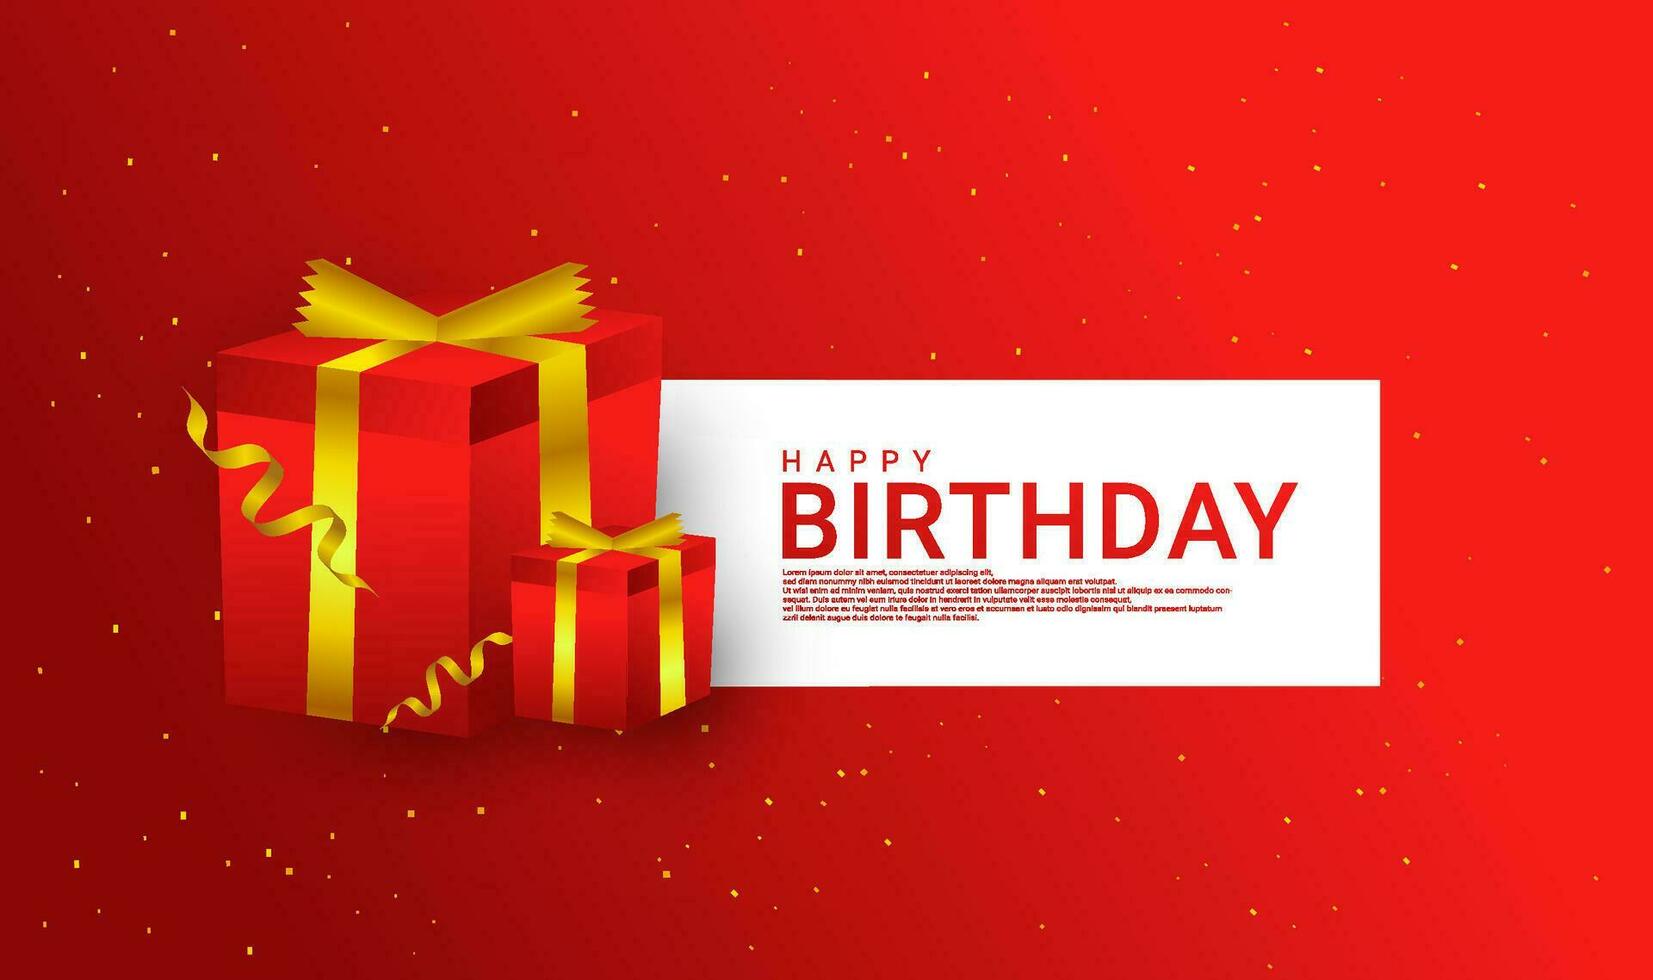 Happy birthday cards, red and gold, suitable for invitation cards, backgrounds, posters, social media posts and more vector